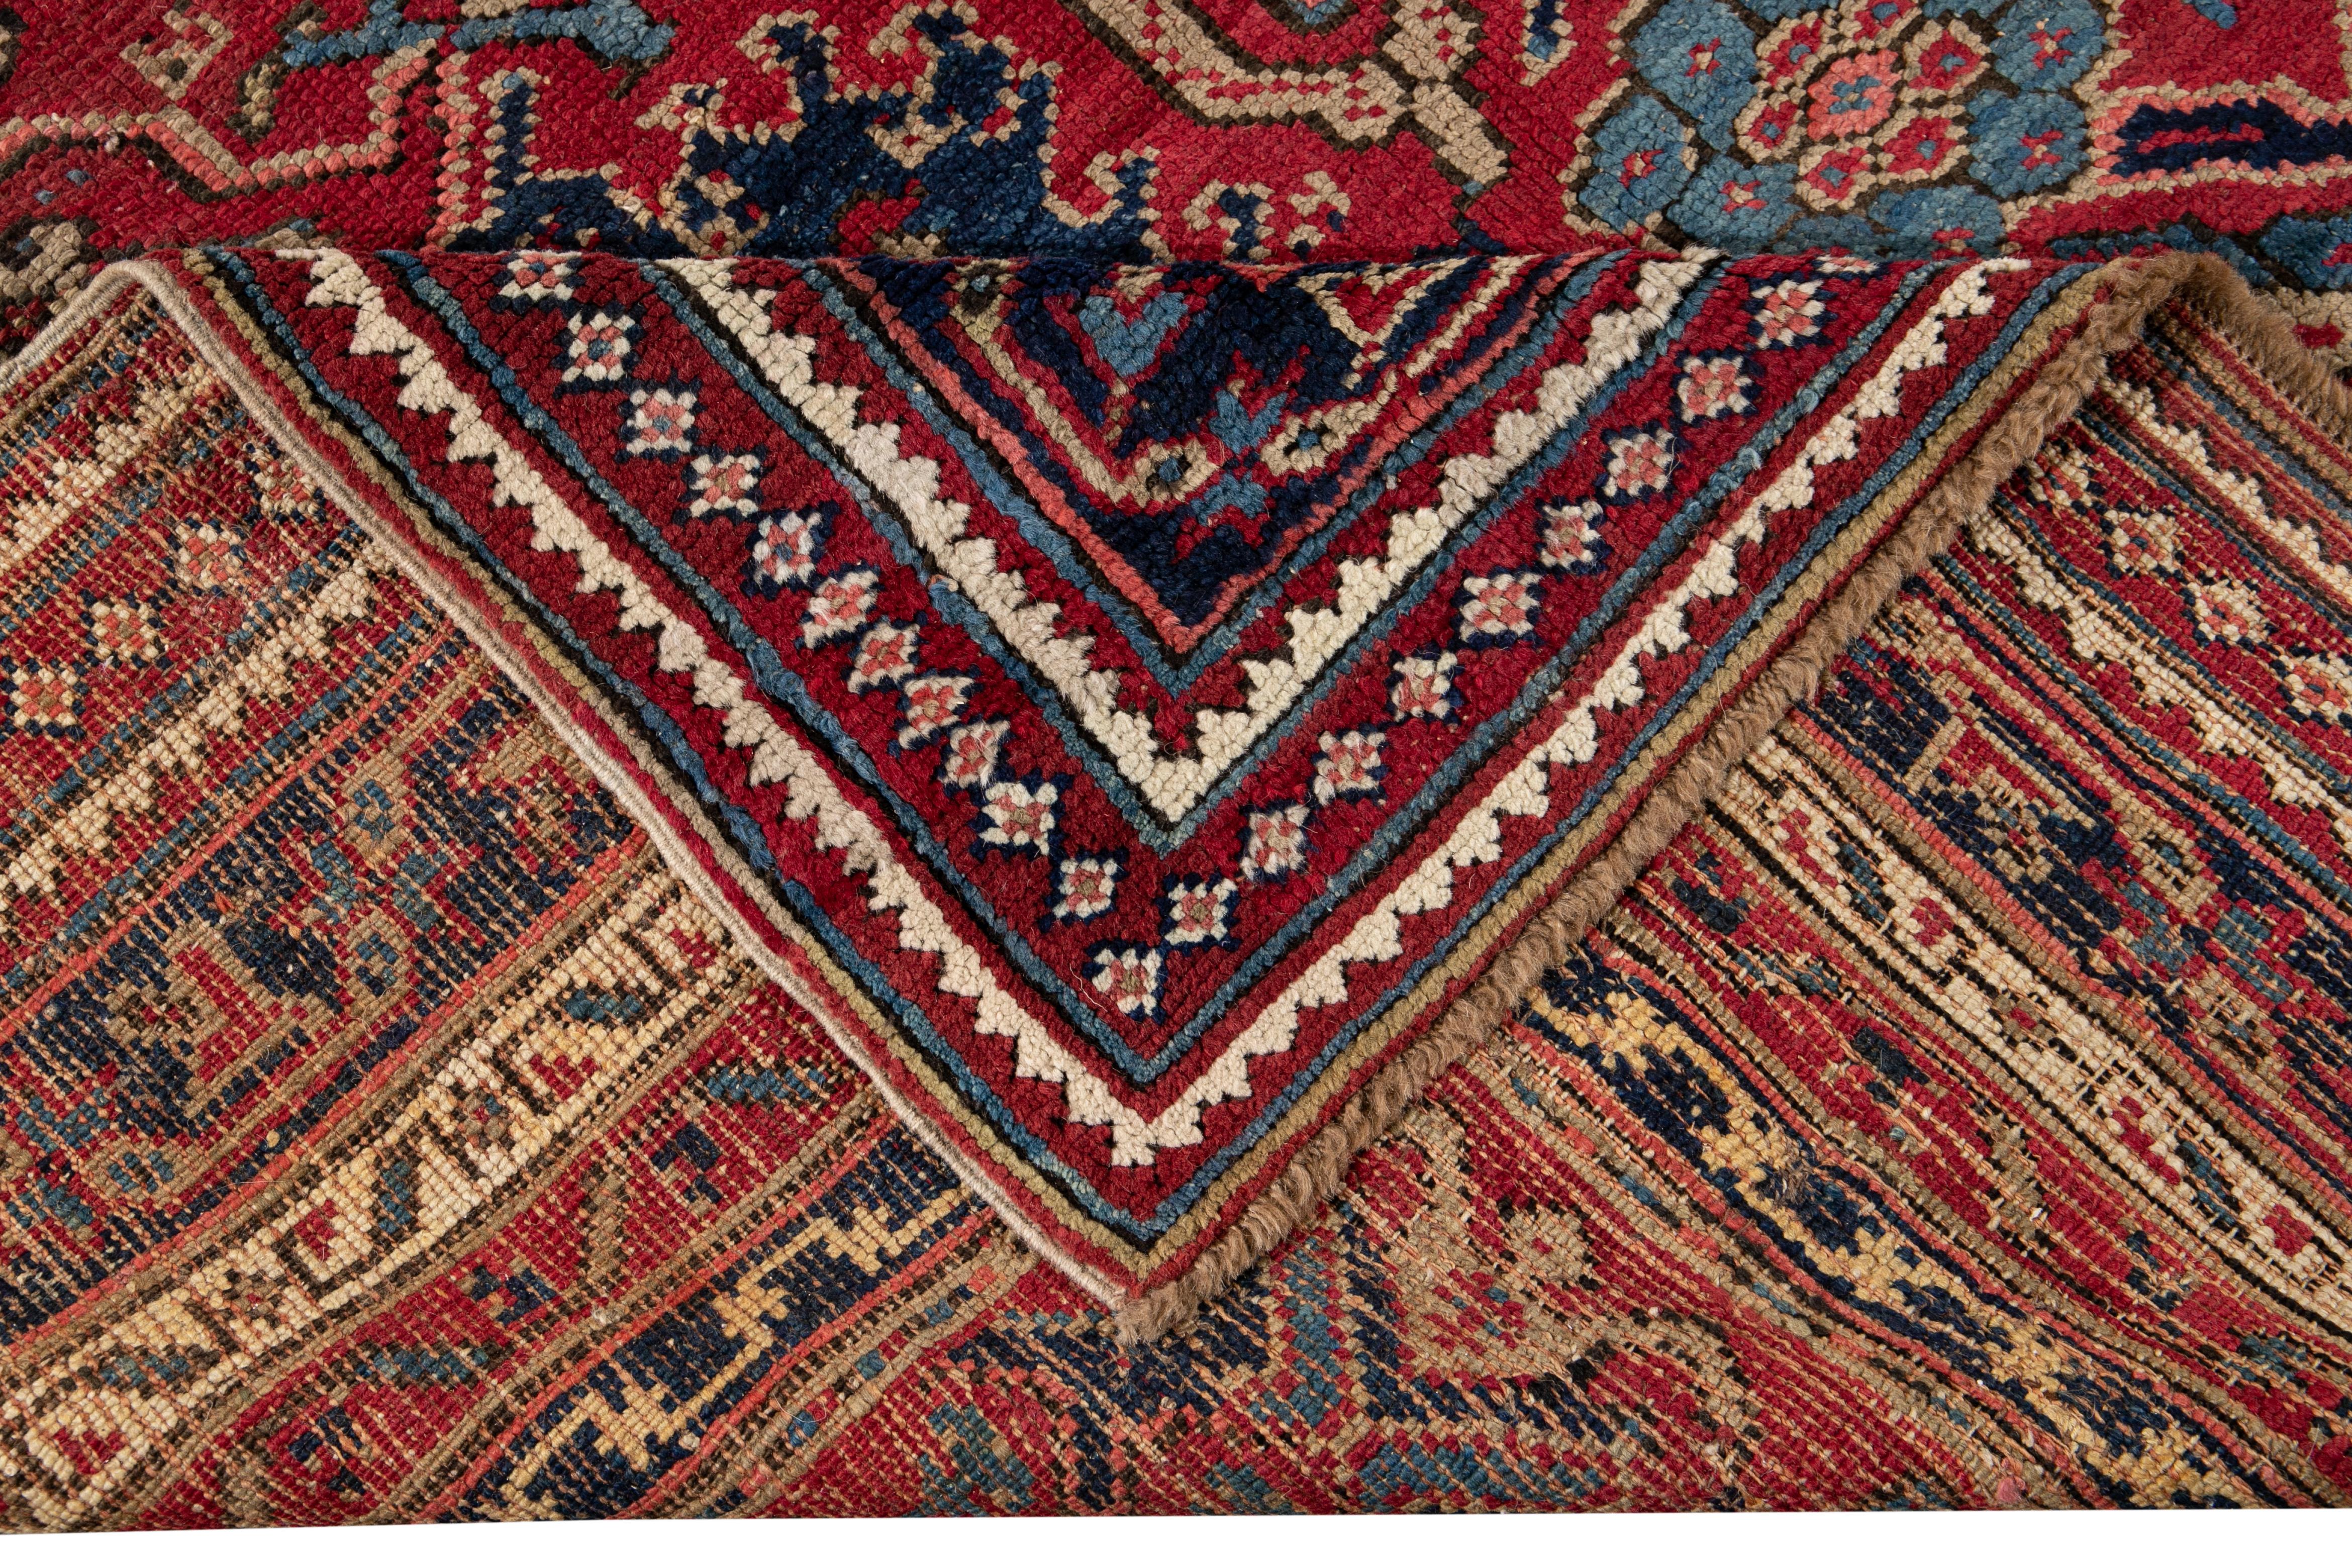 Beautiful Antique Turkish hand-knotted wool rug with a red field. This rug has a designed blue frame with multicolor accents in a gorgeous large-scale floral pattern.

This rug measures: 11'6